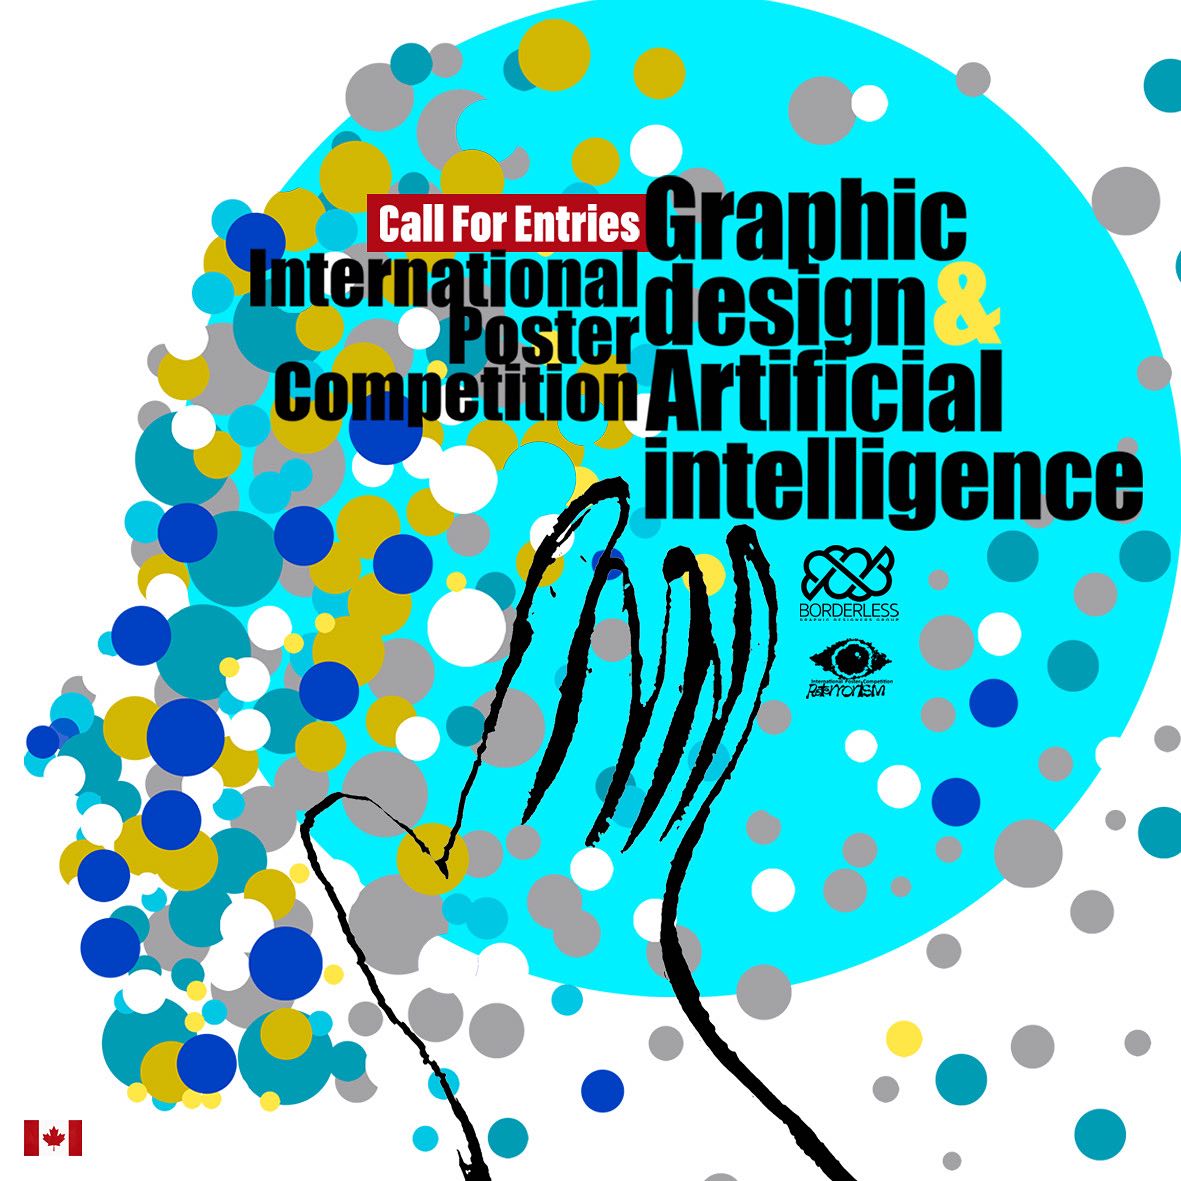 International Poster Competition – Graphic Design Artificial Intelligence